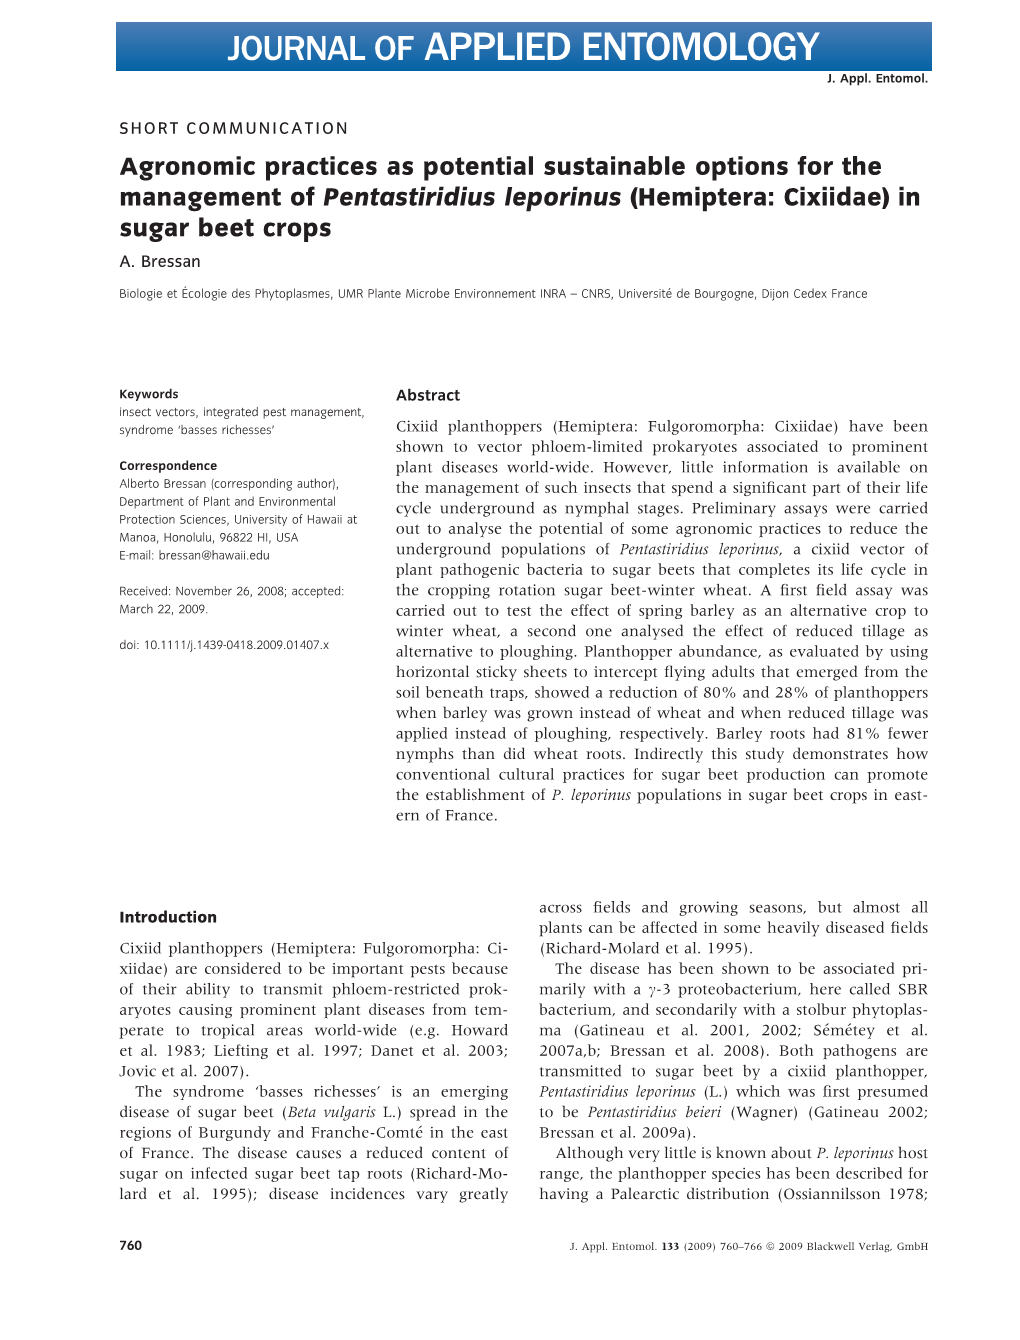 Agronomic Practices As Potential Sustainable Options for the Management of Pentastiridius Leporinus (Hemiptera: Cixiidae) in Sugar Beet Crops A